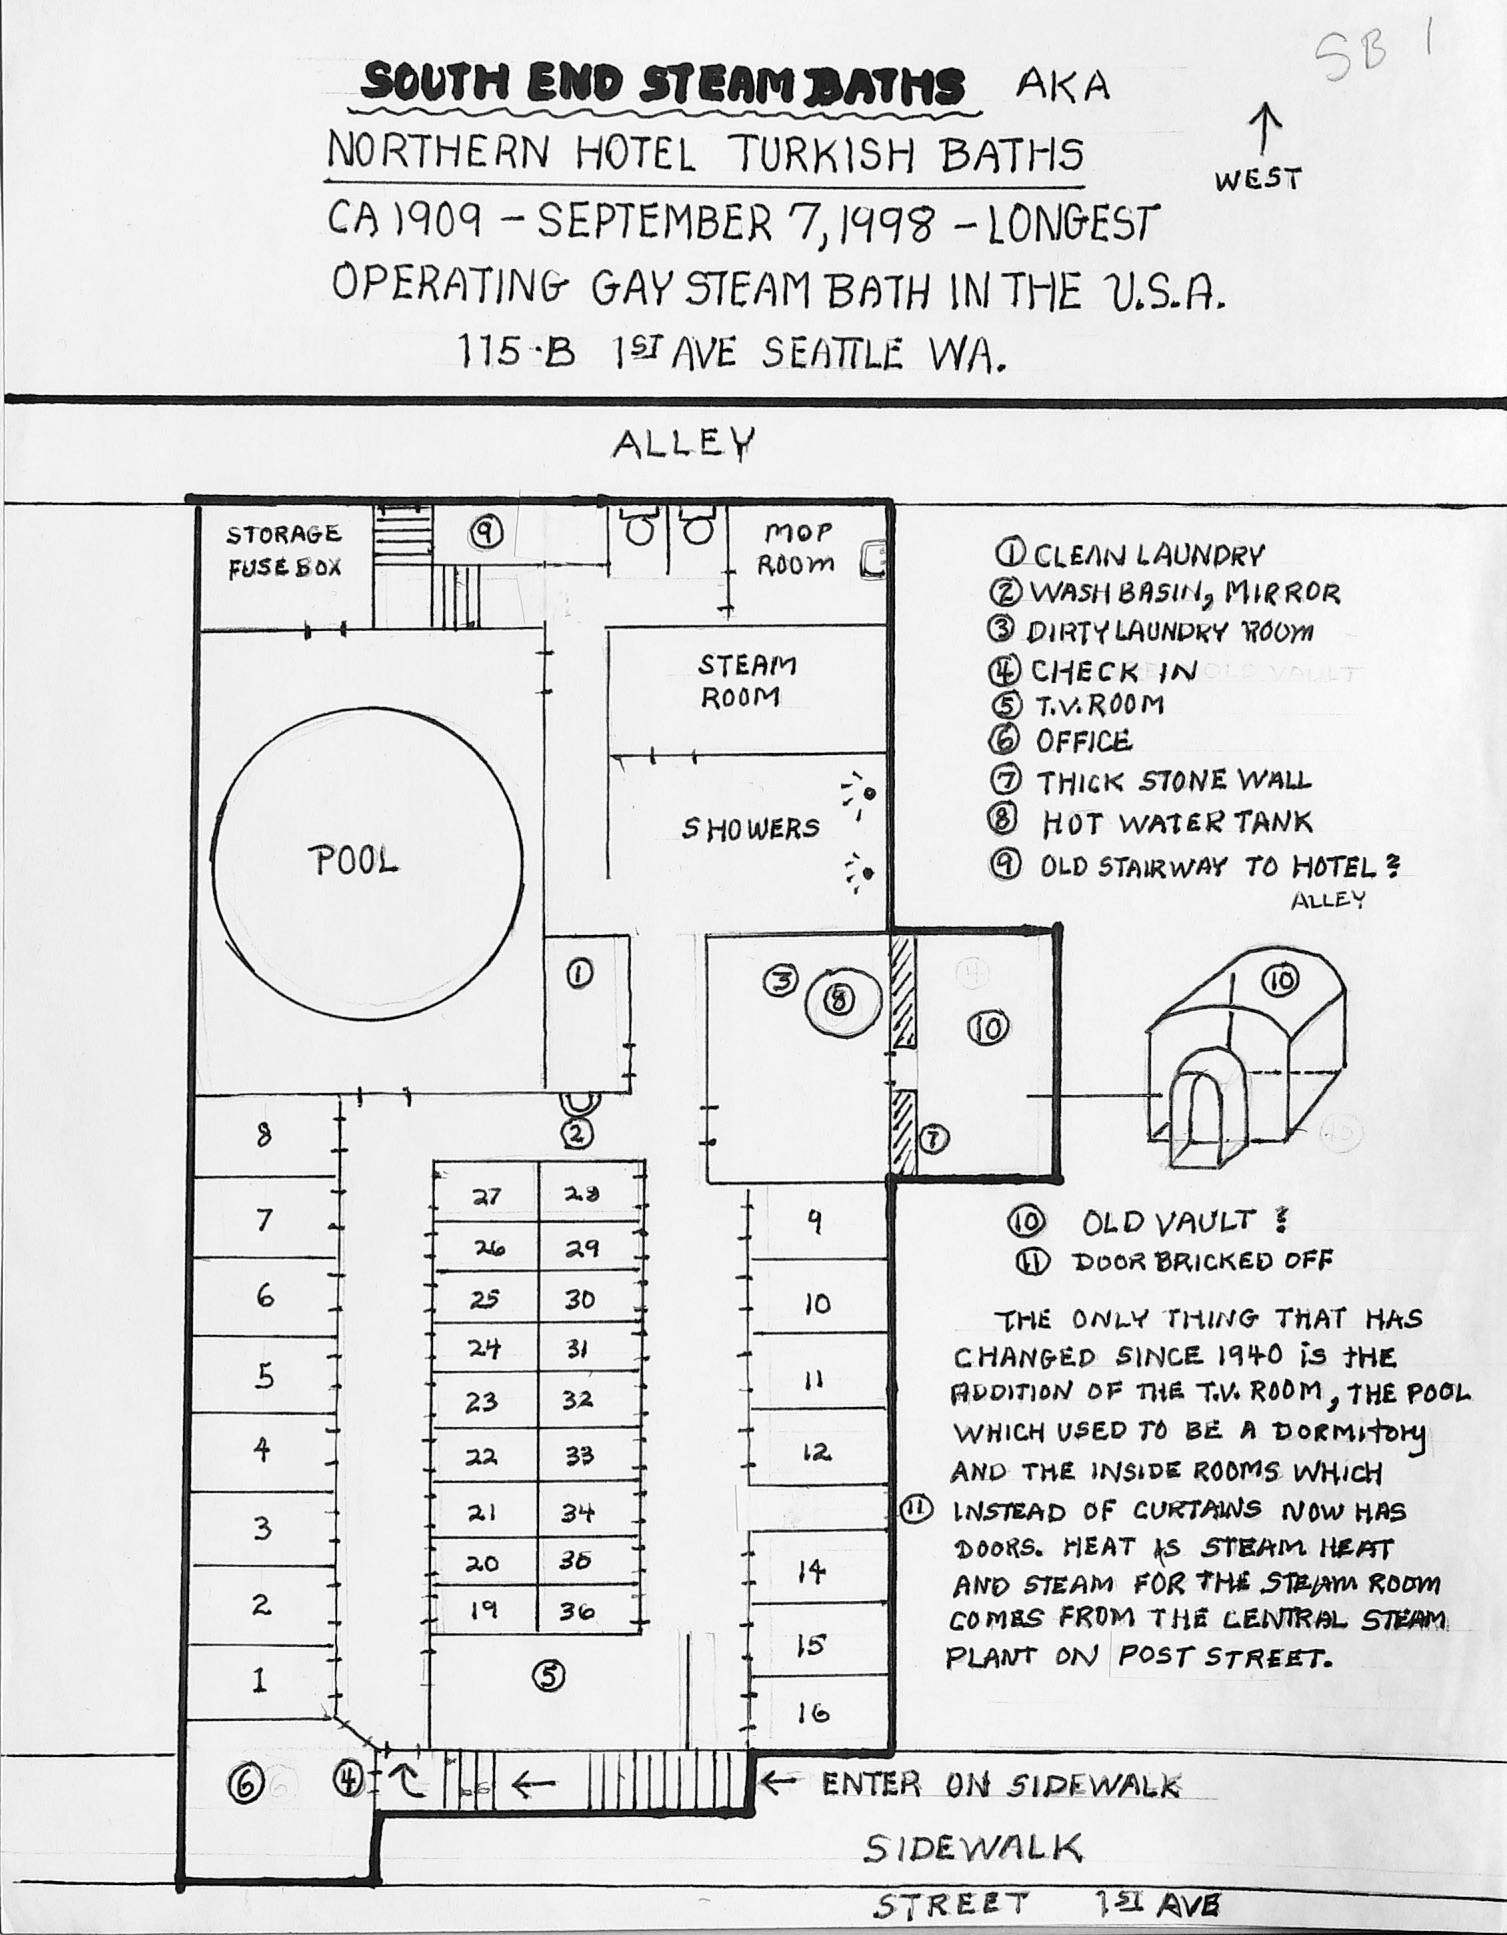 Floor plan of the South End Steam Baths (1940s-1998)